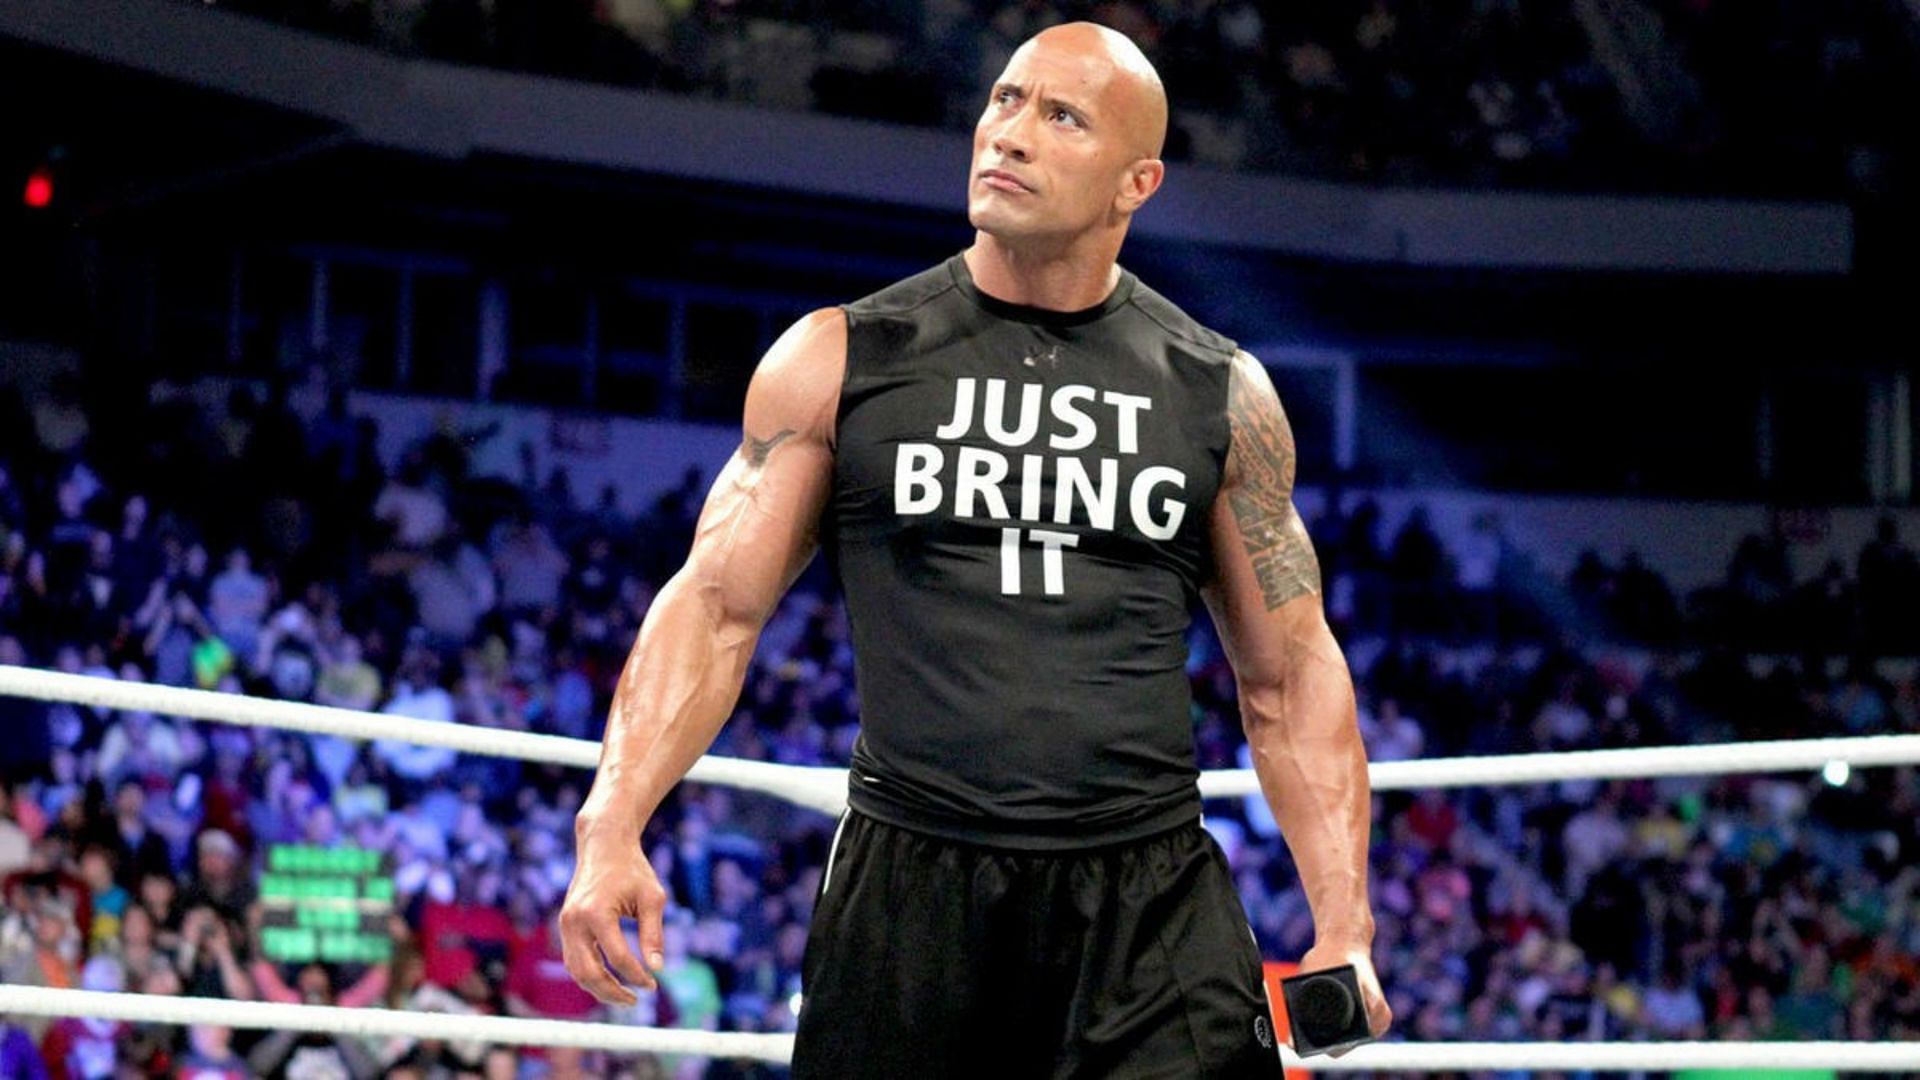 The Rock made a surprising appearance on WWE SmackDown last month